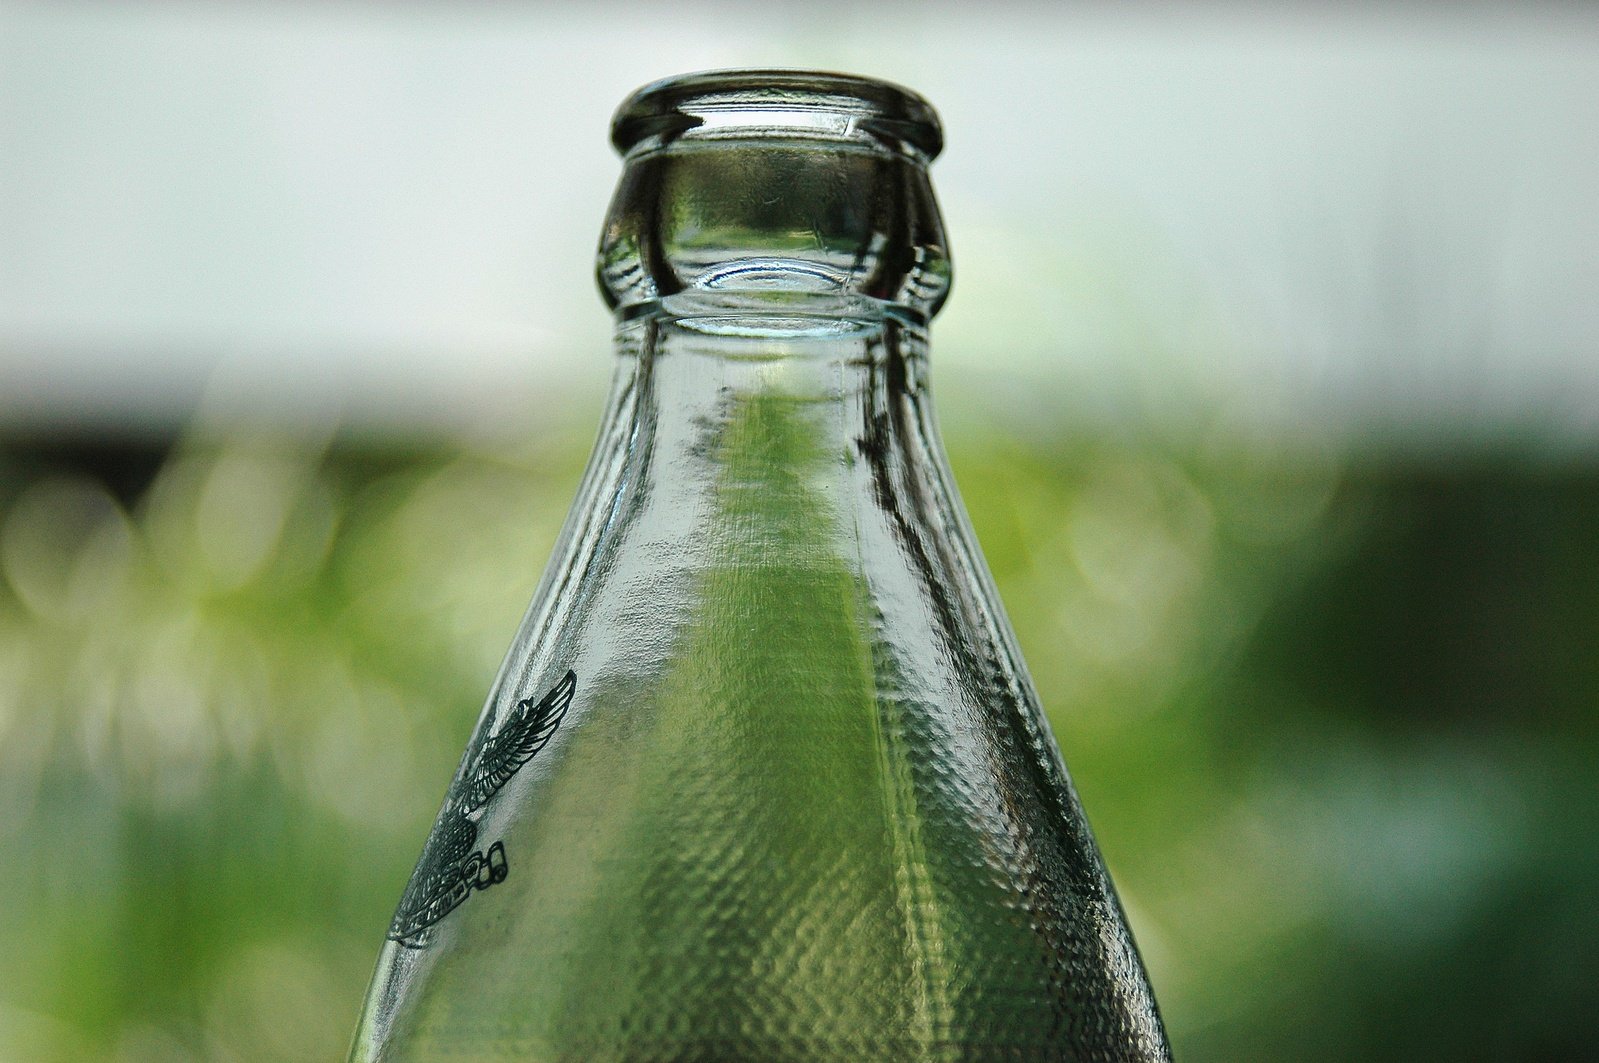 a close up of a glass bottle on a table